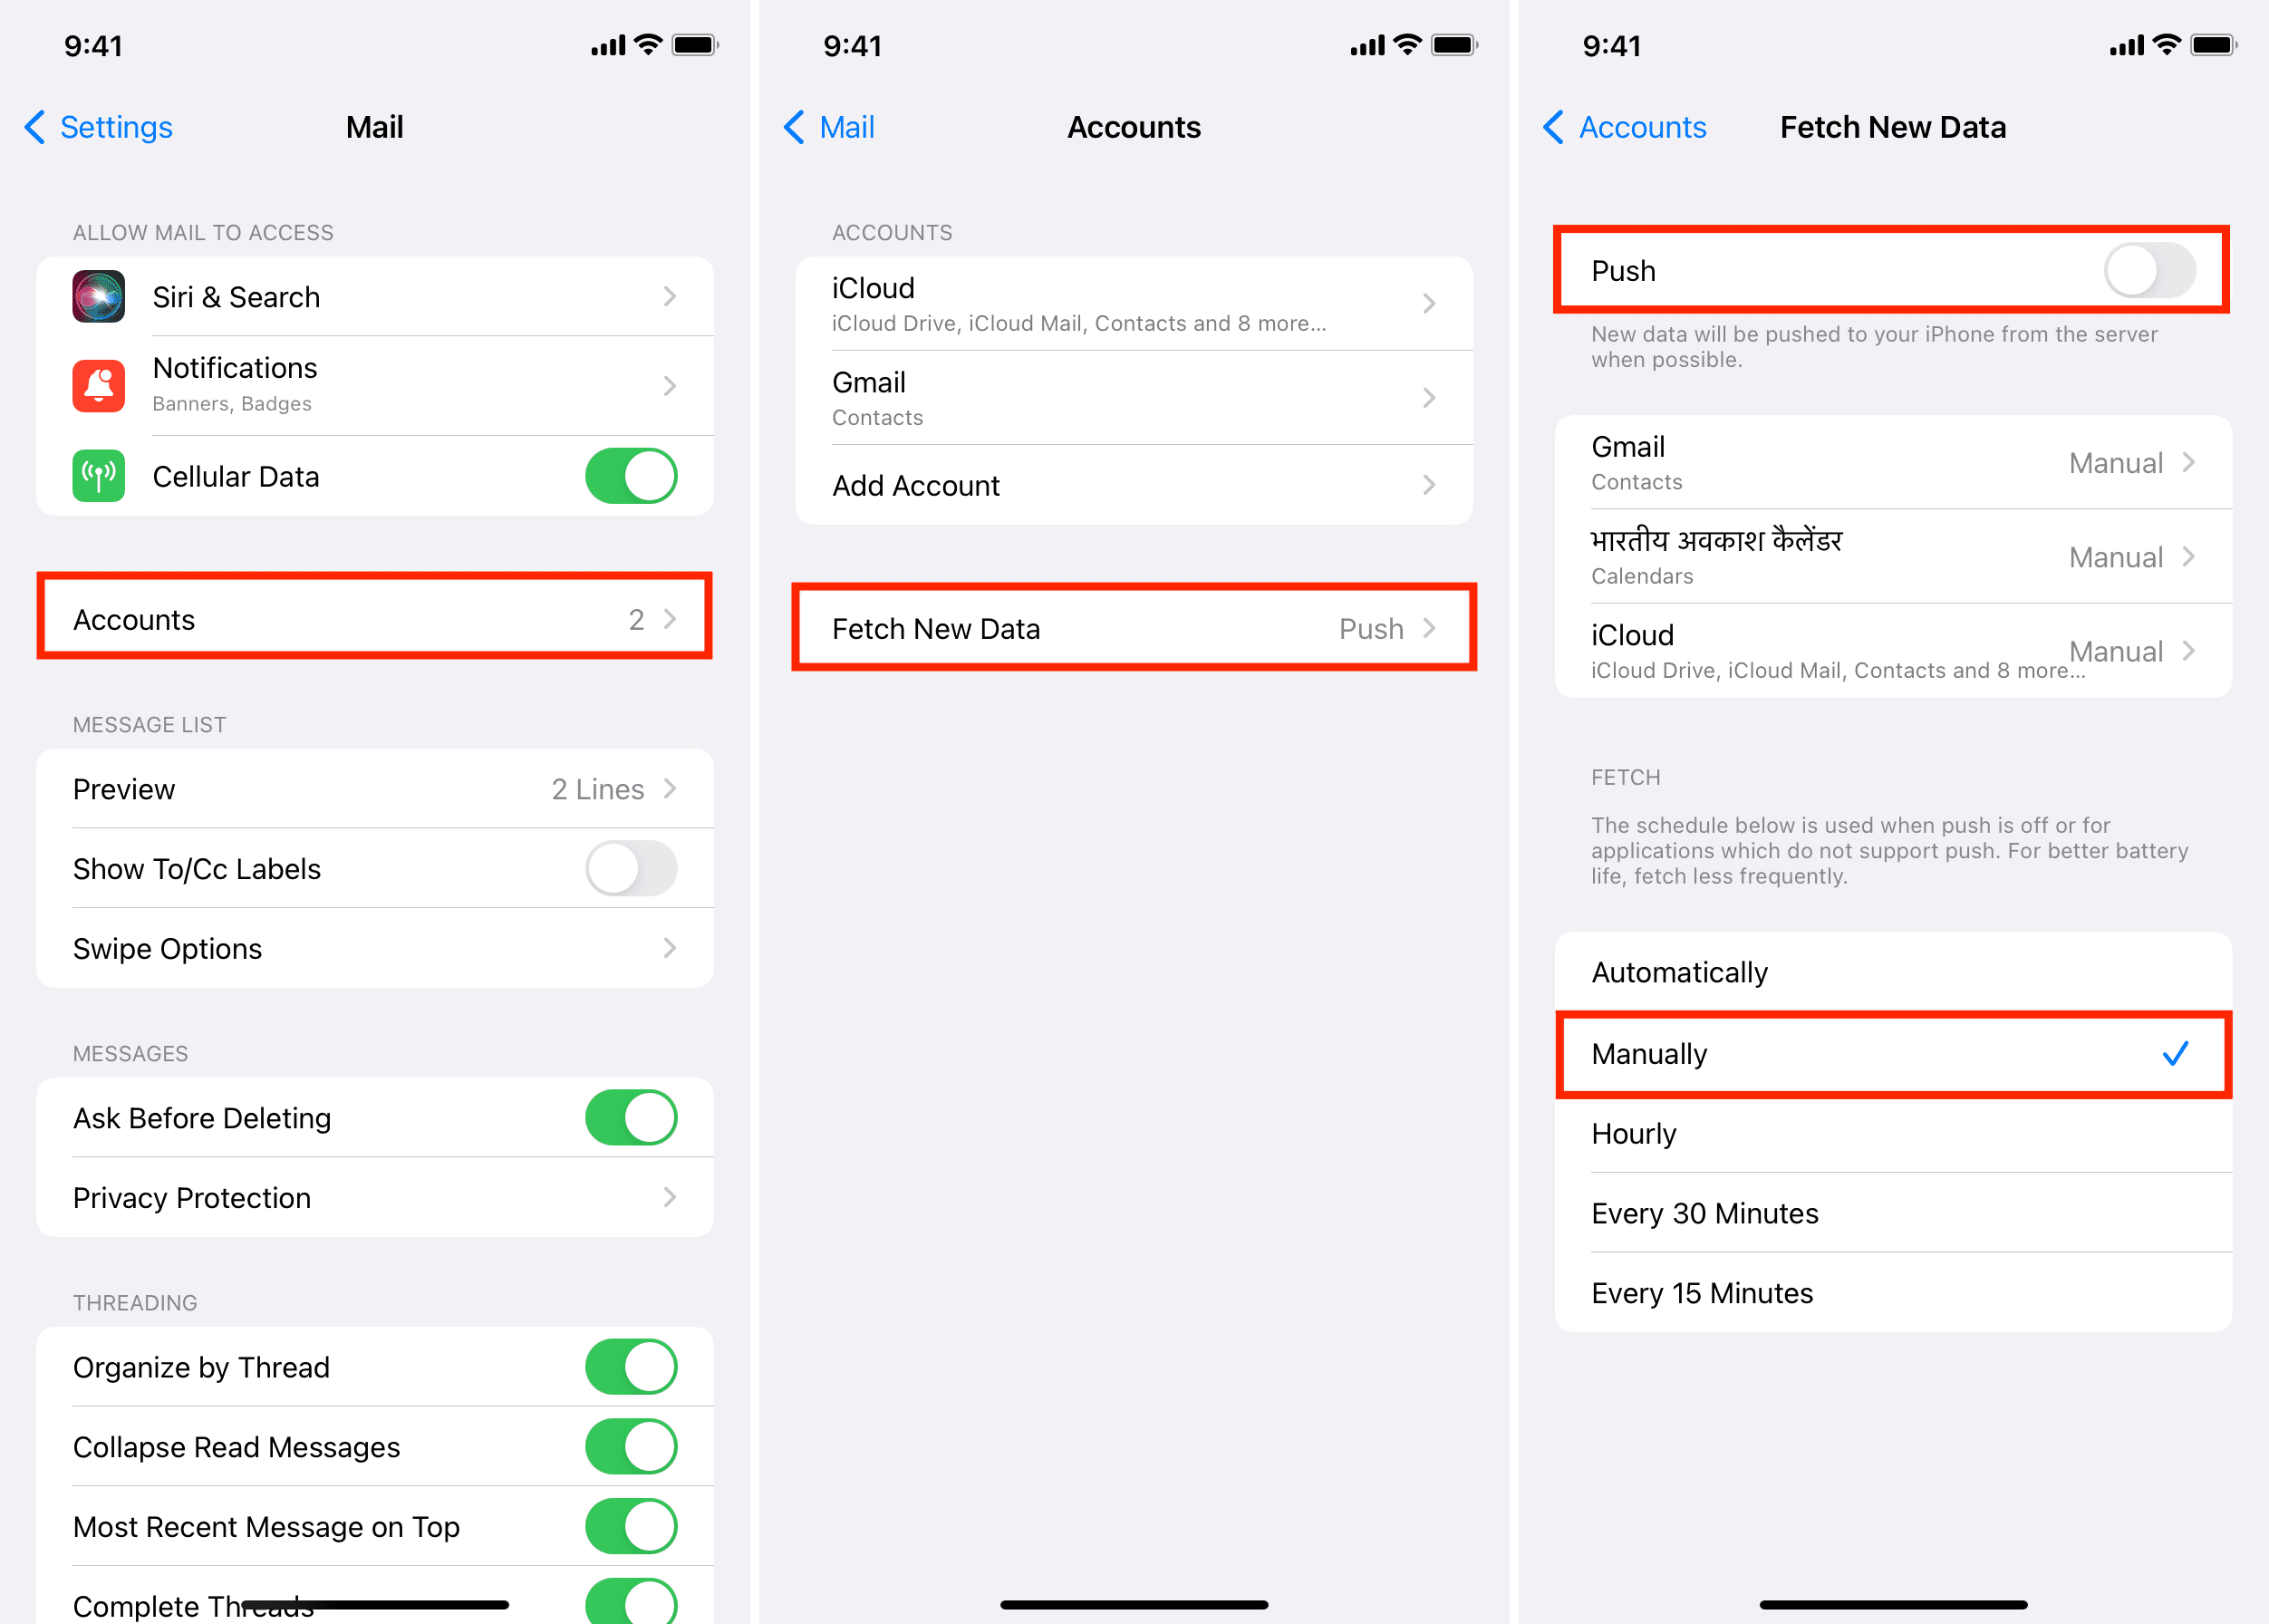 Manually fetch new data for the Mail app on iPhone